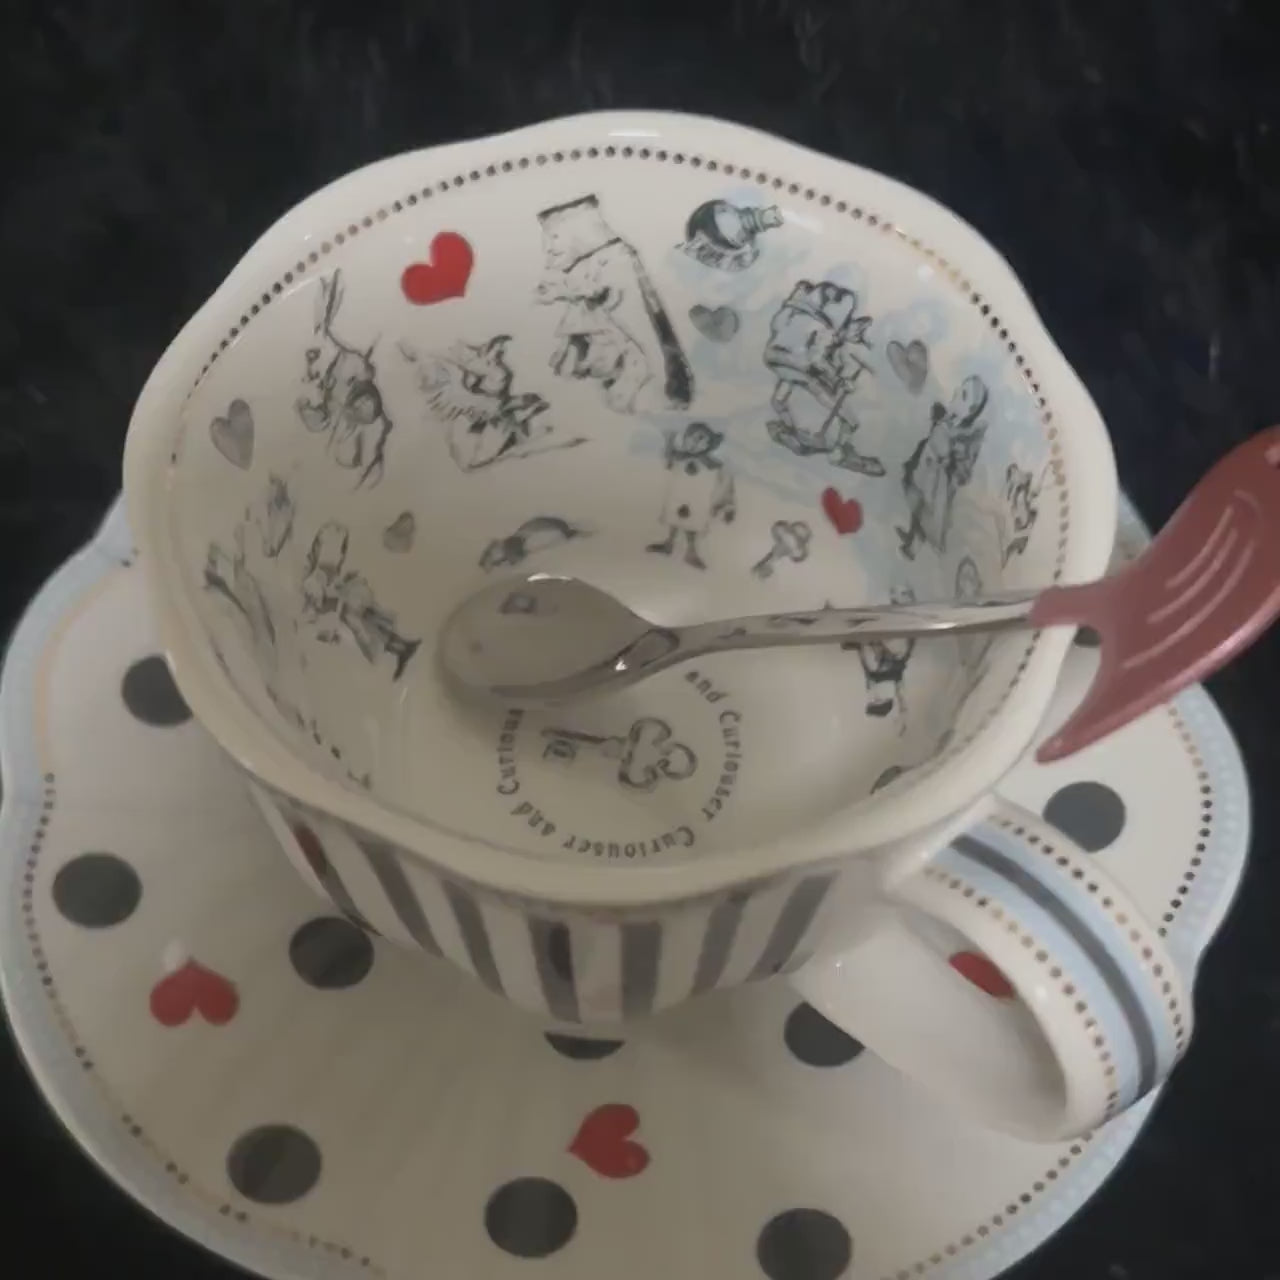 Alice in Wonderland.  Optional Oracle cards. Teacup and saucer set. FREE course Tea leaf reading. Tea cup reading.